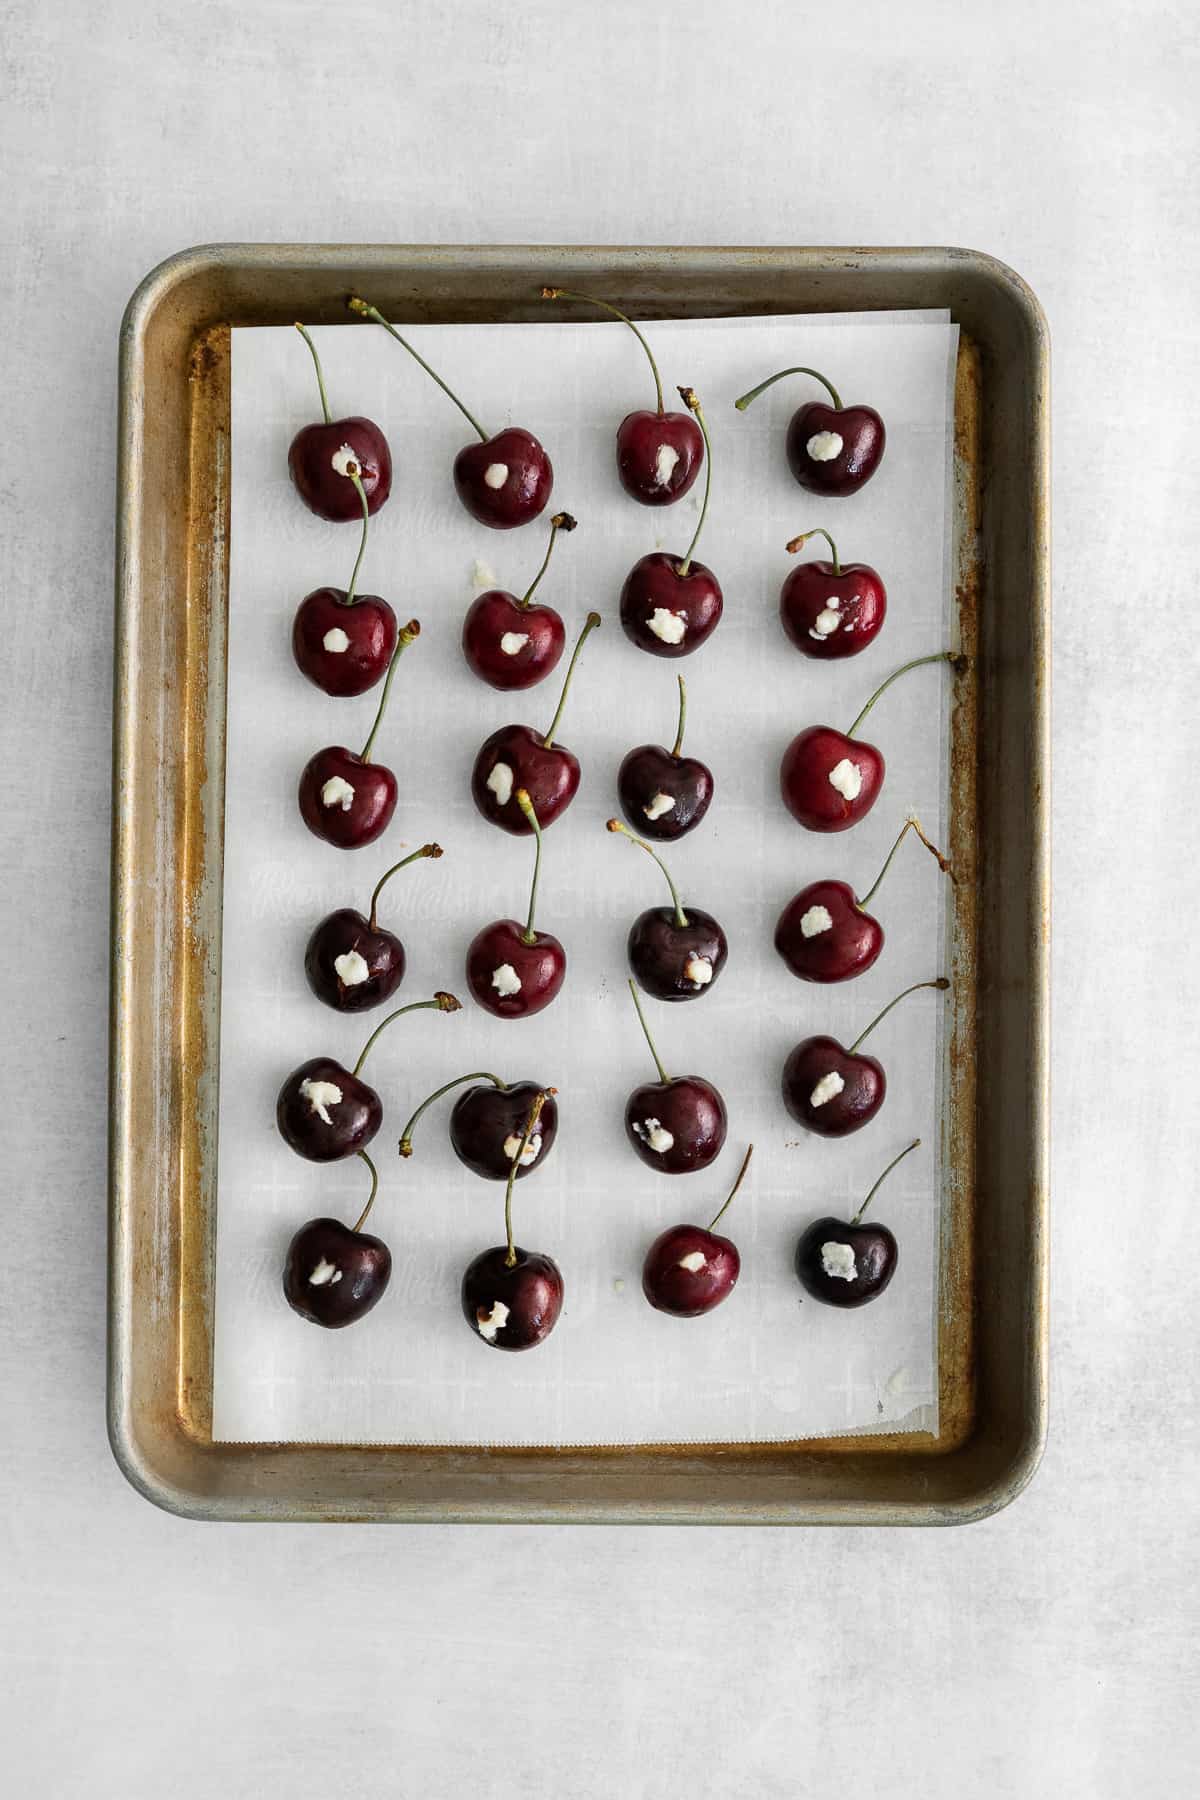 Chocolate covered cherries with marscapone cheese in the middle. 